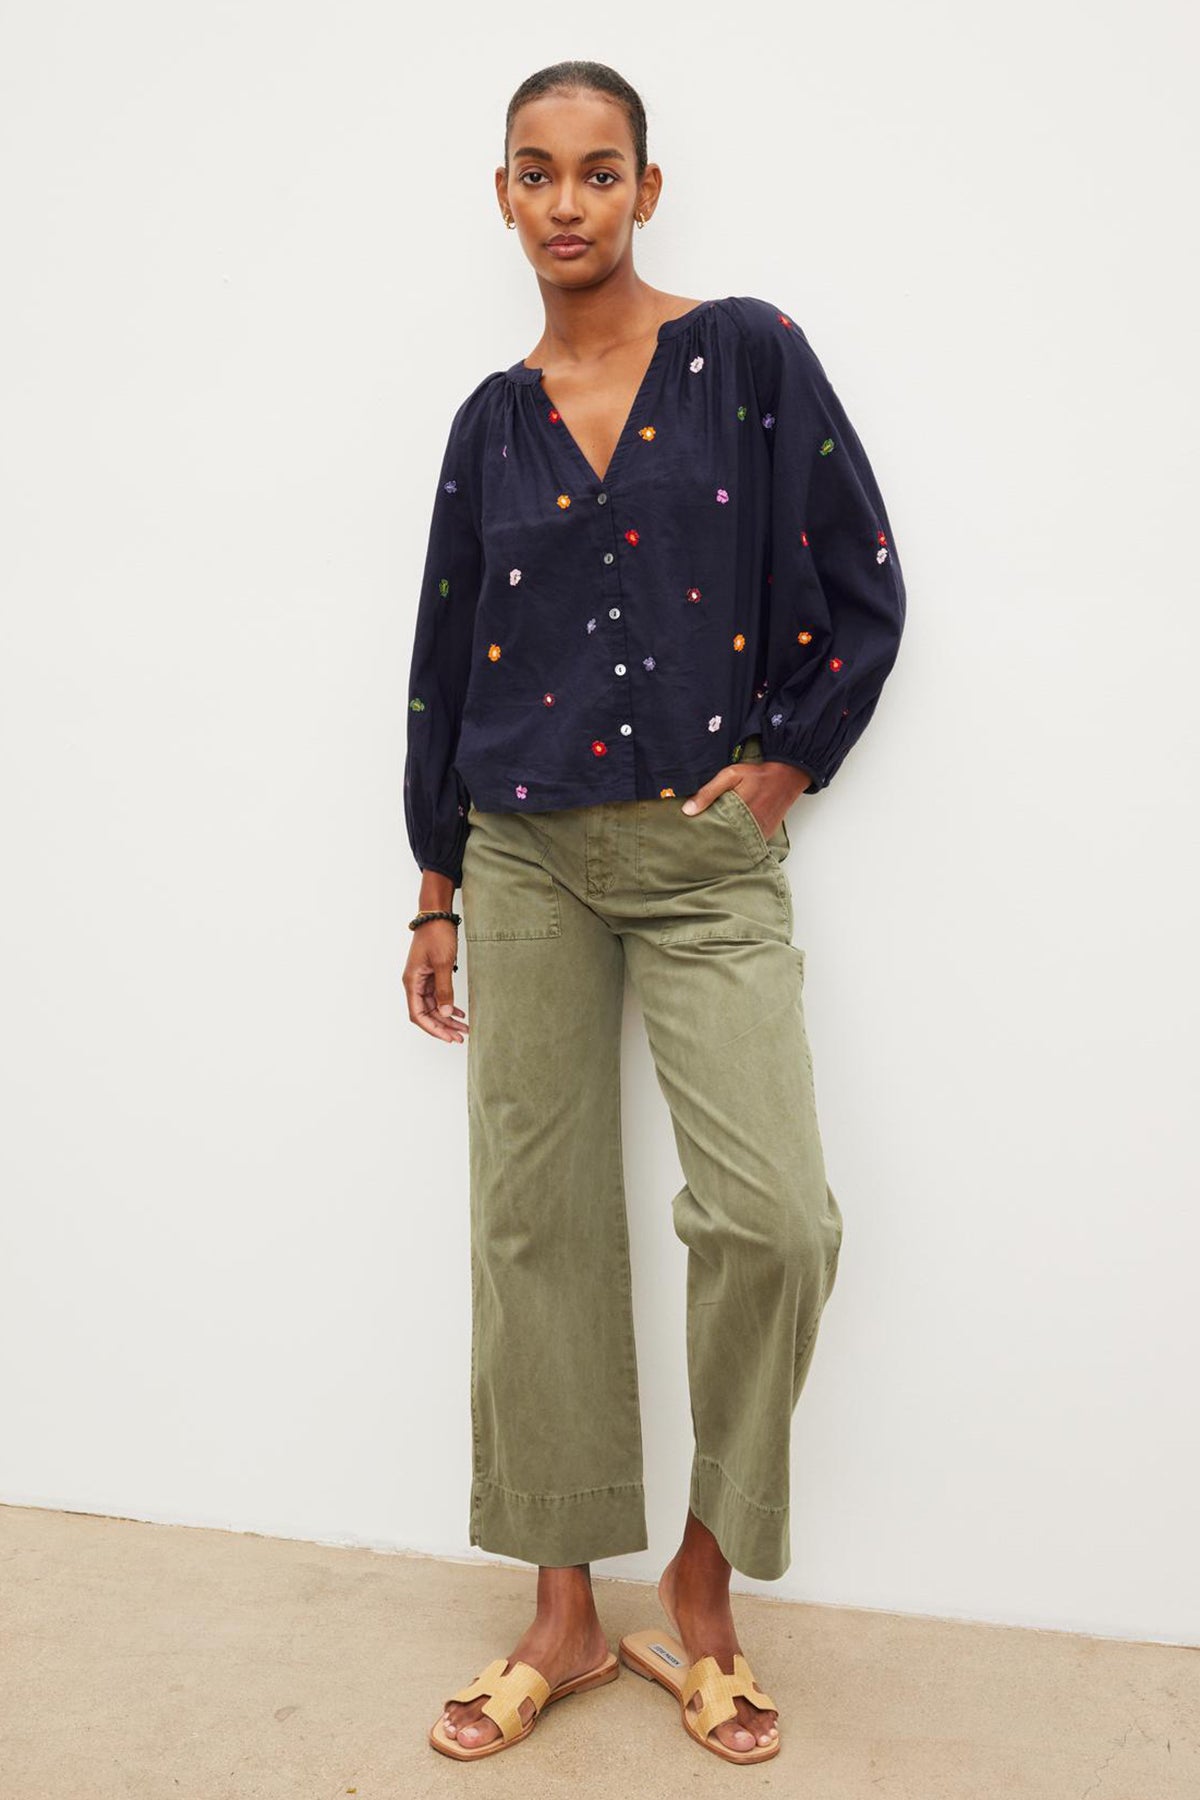 A woman standing in a studio wearing a navy blouse with colorful polka dots, Velvet by Graham & Spencer Mya Cotton Canvas Pants, and tan sandals.-36425663447233